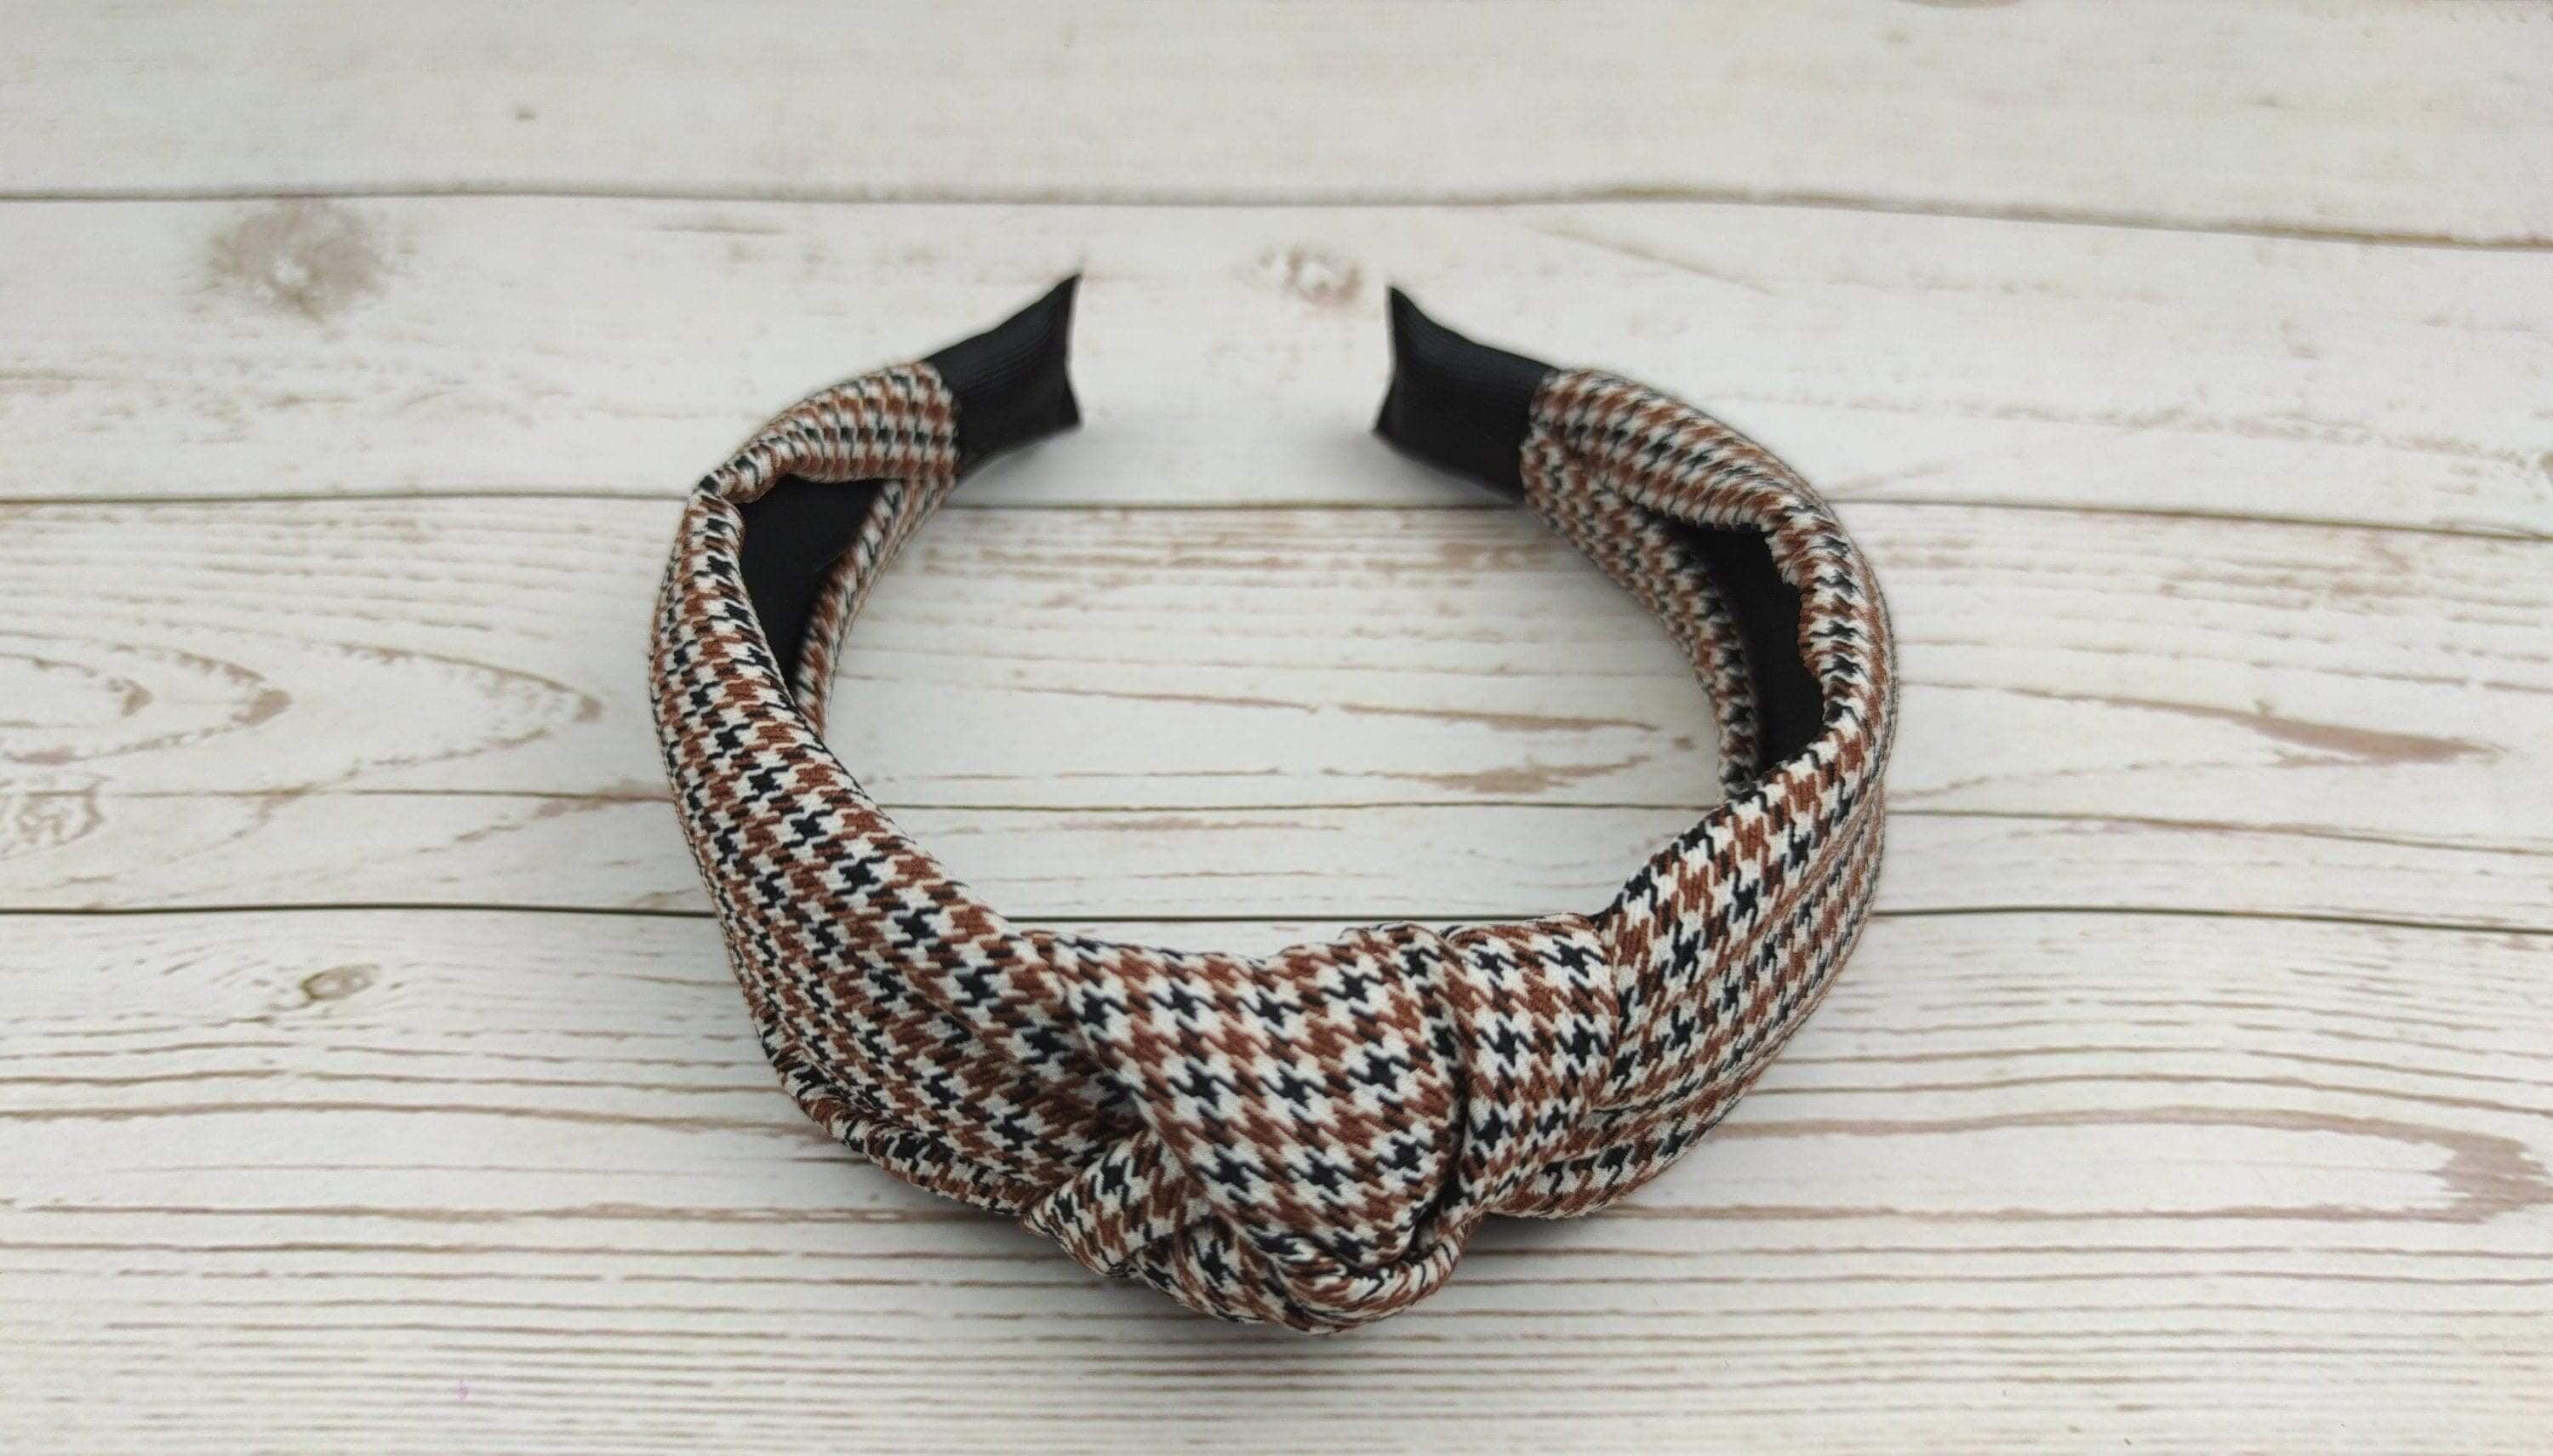 Trendy Chic White, Brown and Black Knotted Headband with Plaid Pattern for Women - Perfect for College! available at Moyoni Design